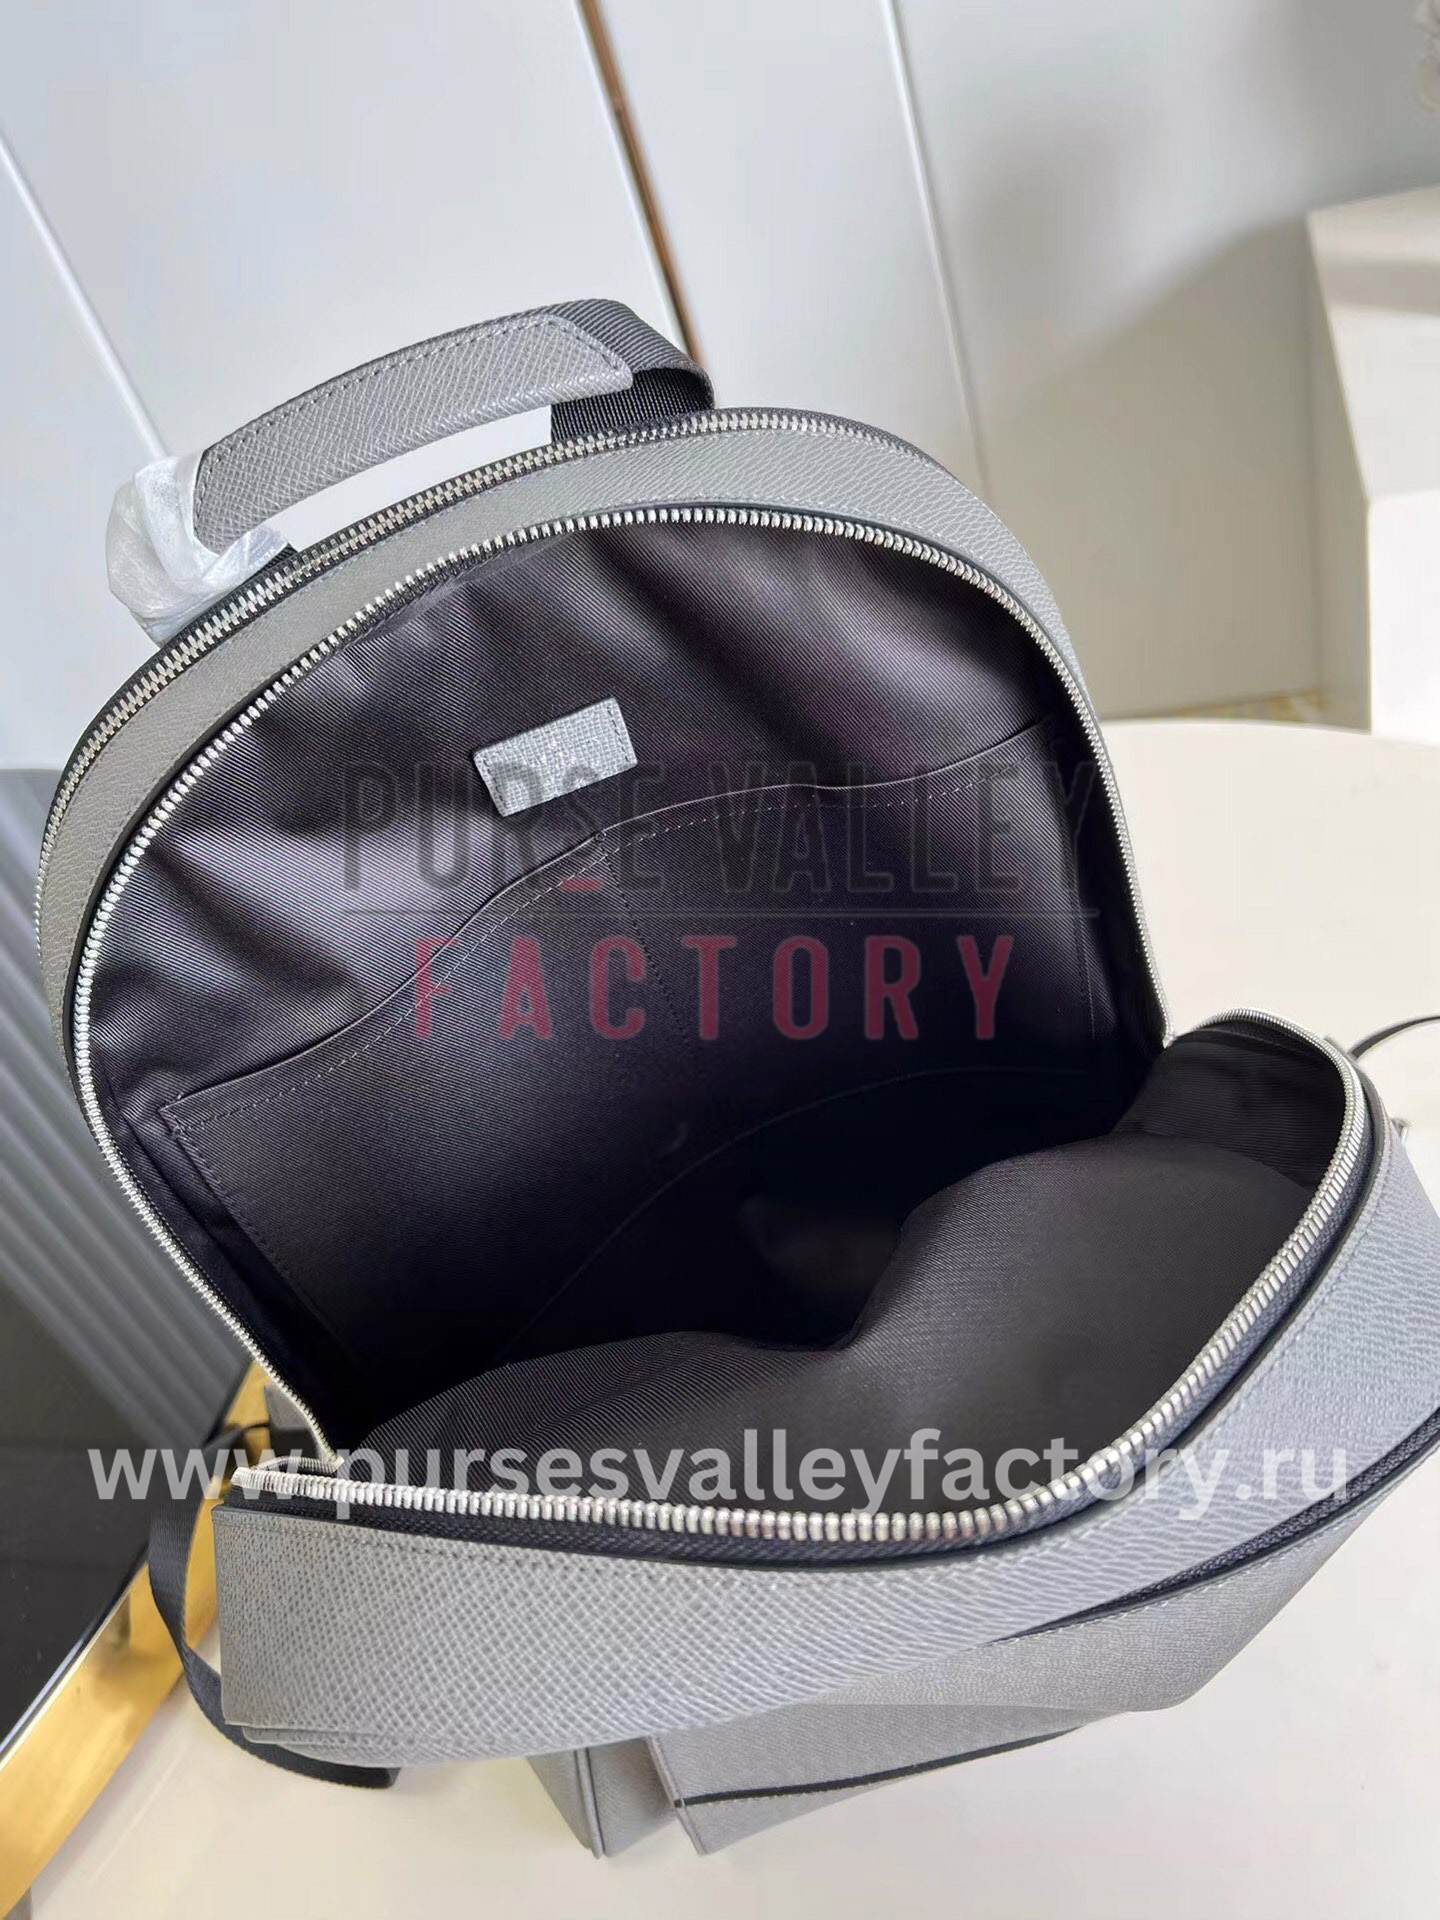 LOUIS VUITTON ADRIAN BACKPACK TAIGA LEATHER